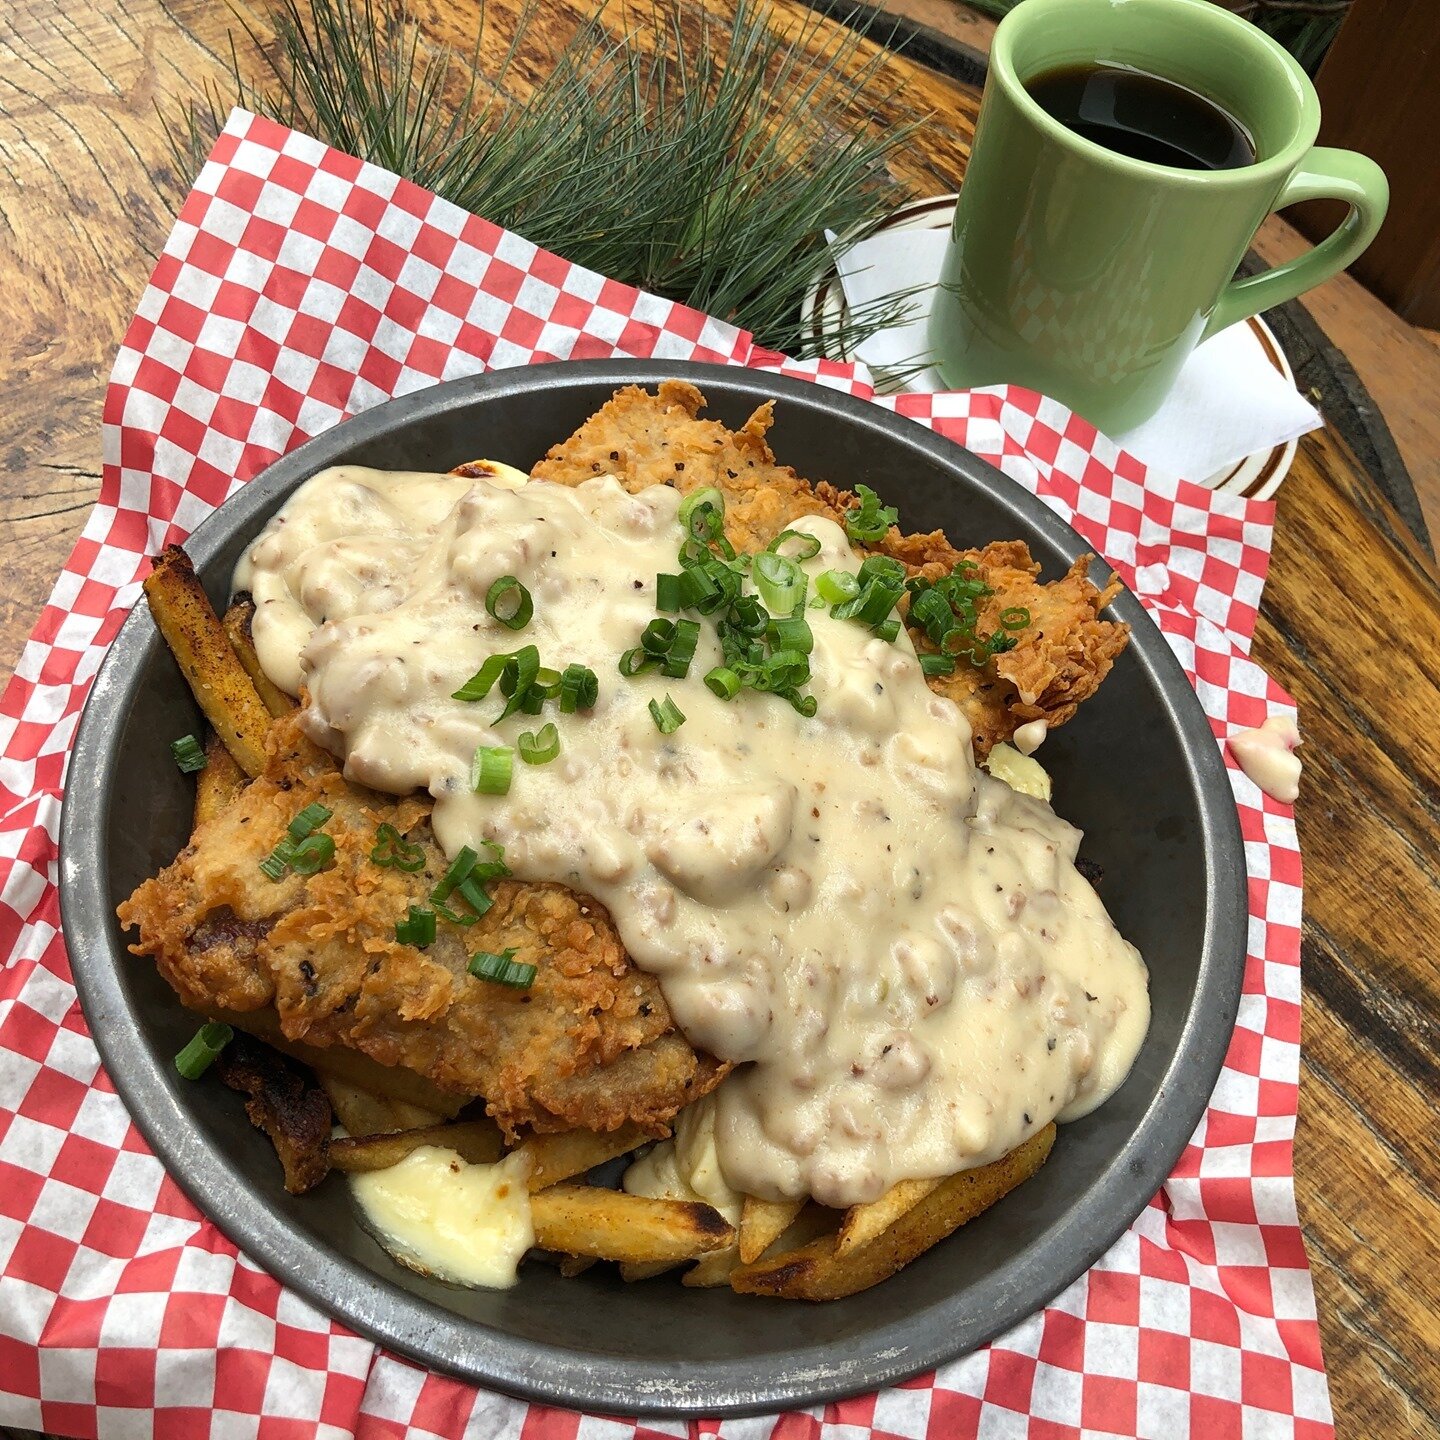 This Hungry Boy Poutine is only available during Sunday Brunch, is a whole chicken fried steak and fries with Ropp's cheese curds, smothered in our country sausage gravy. Only $12!⁠
.⁠
.⁠
.⁠
#WatsonsShack #Watsons #WatsonsRail #UIUC #Foodies #EatingI